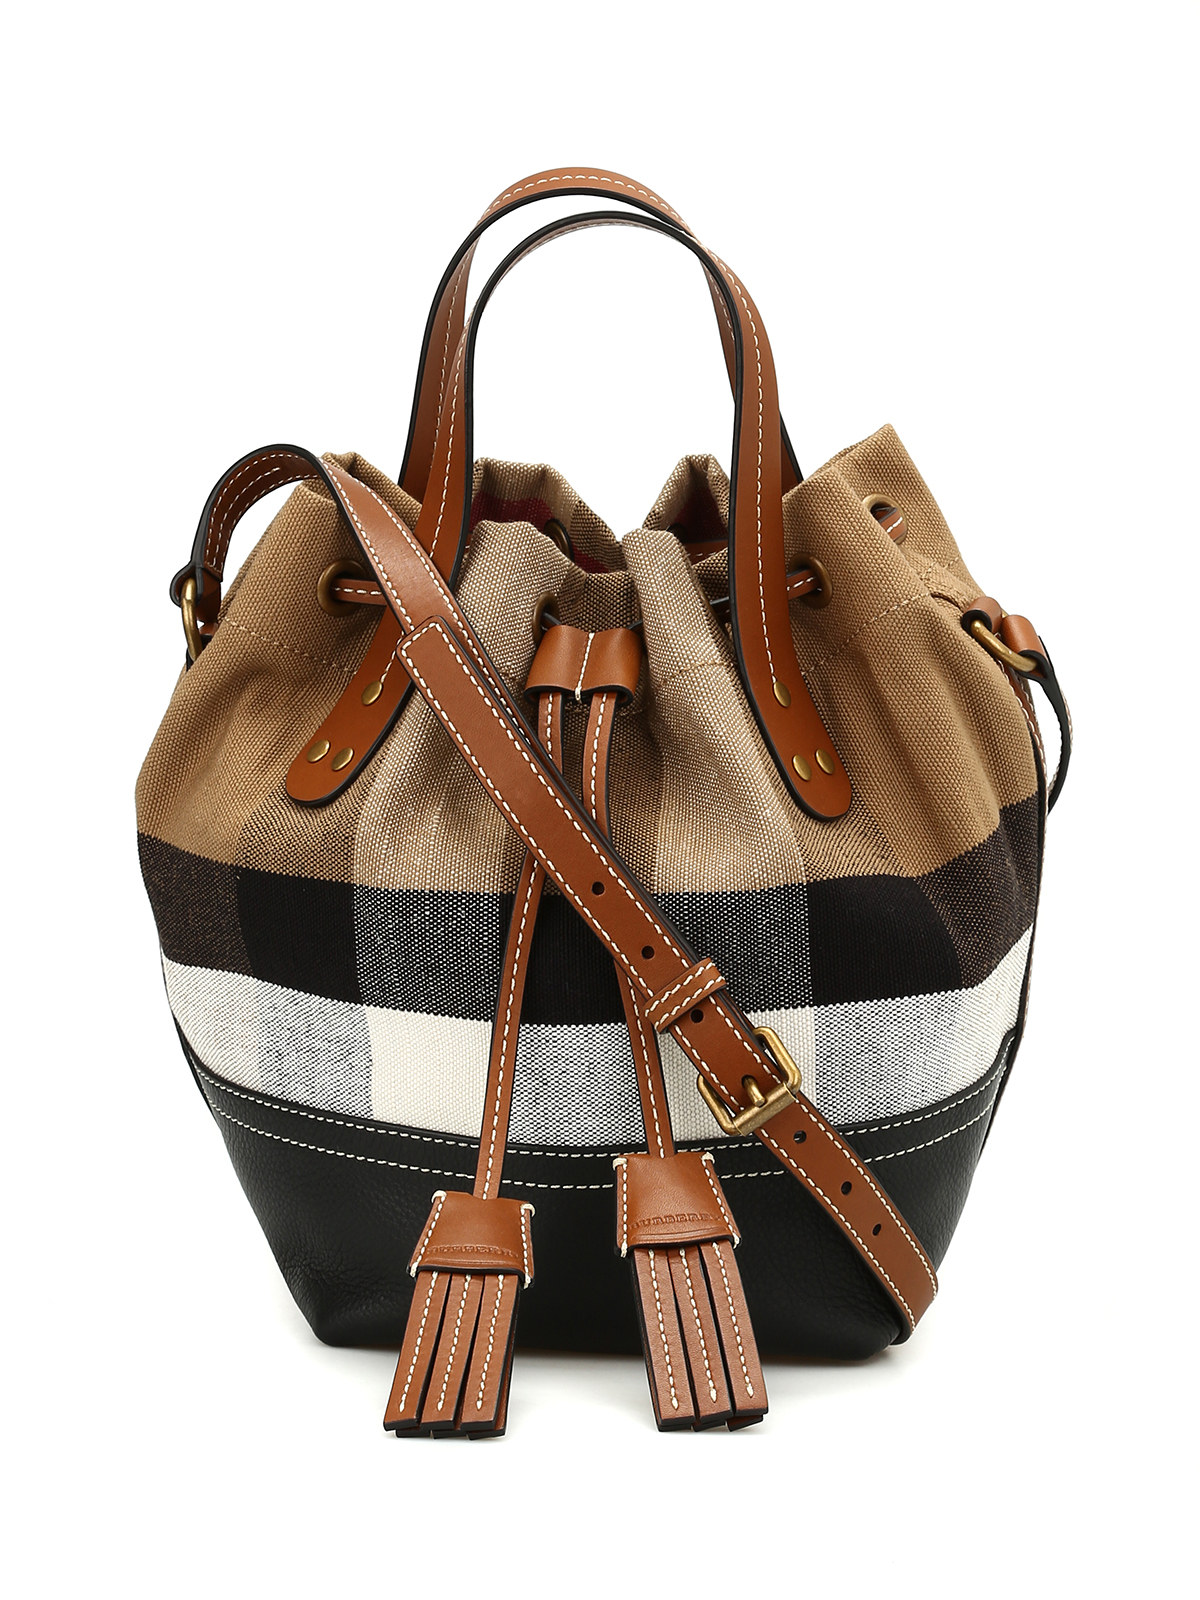 burberry bucket bag price, Burberry Clothing & Bag - Up to 40% - 70% off Discount sale